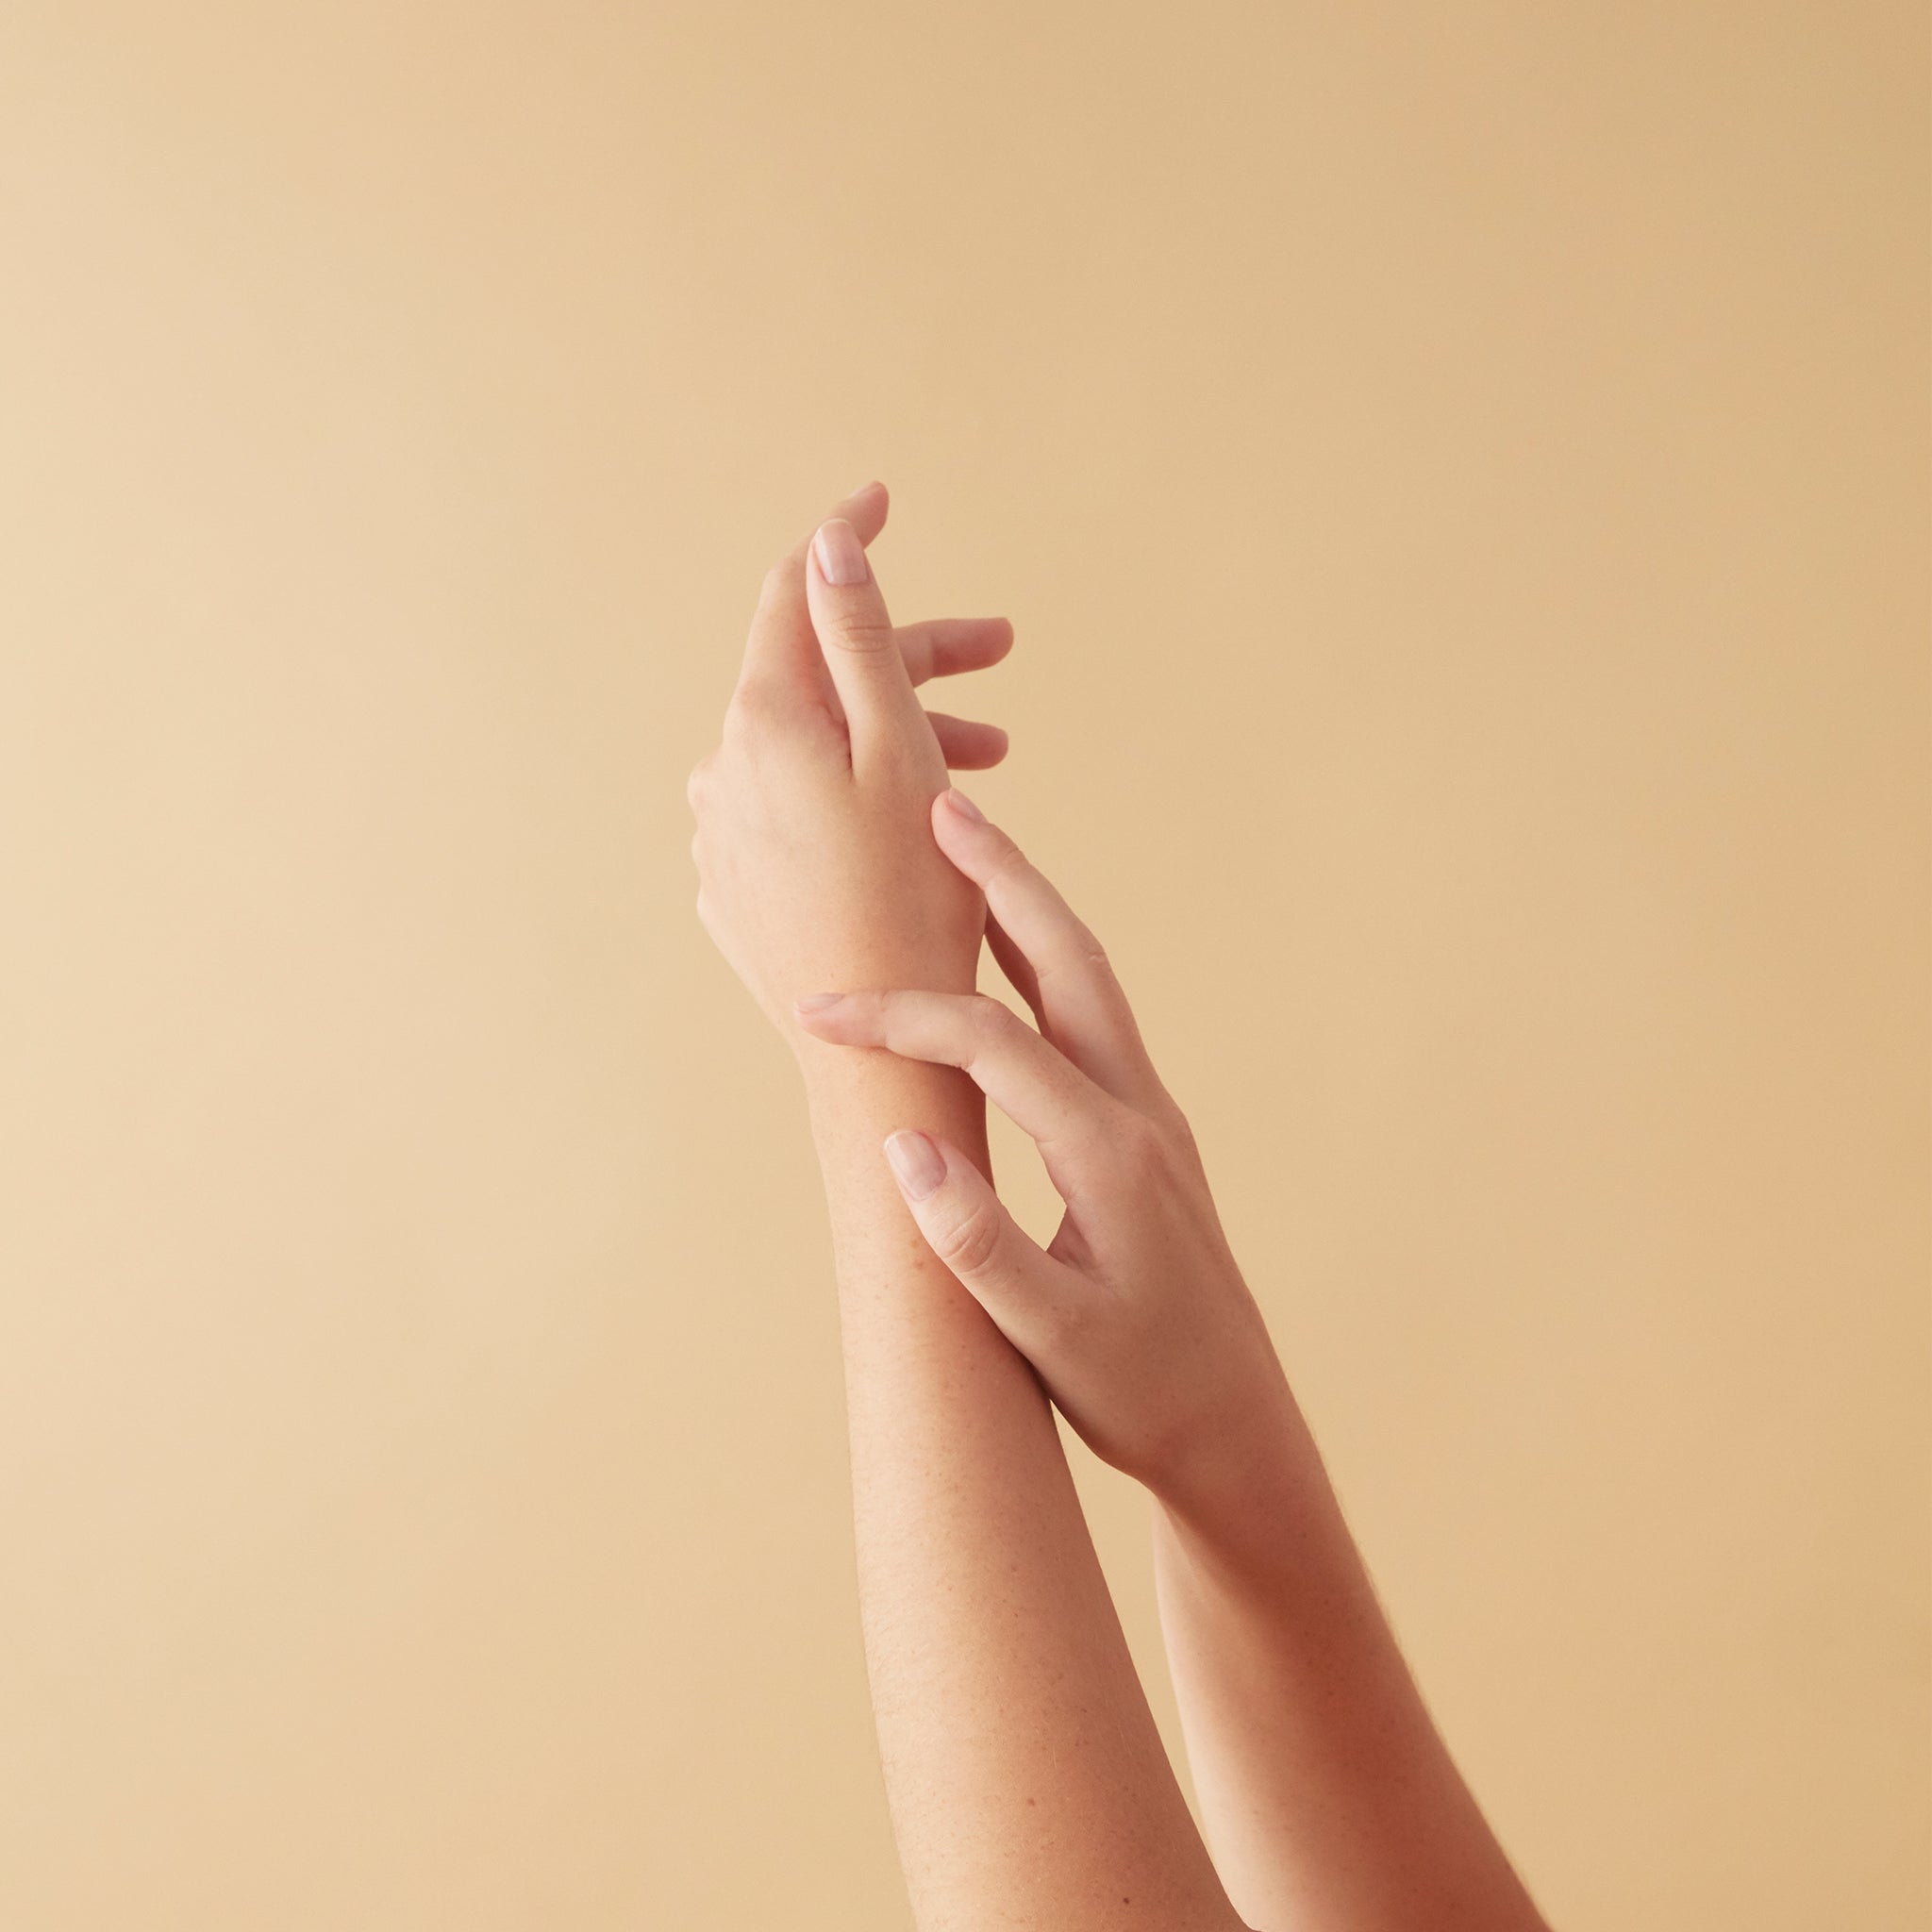 Hands in air, one hand touching opposite wrist over yellow background